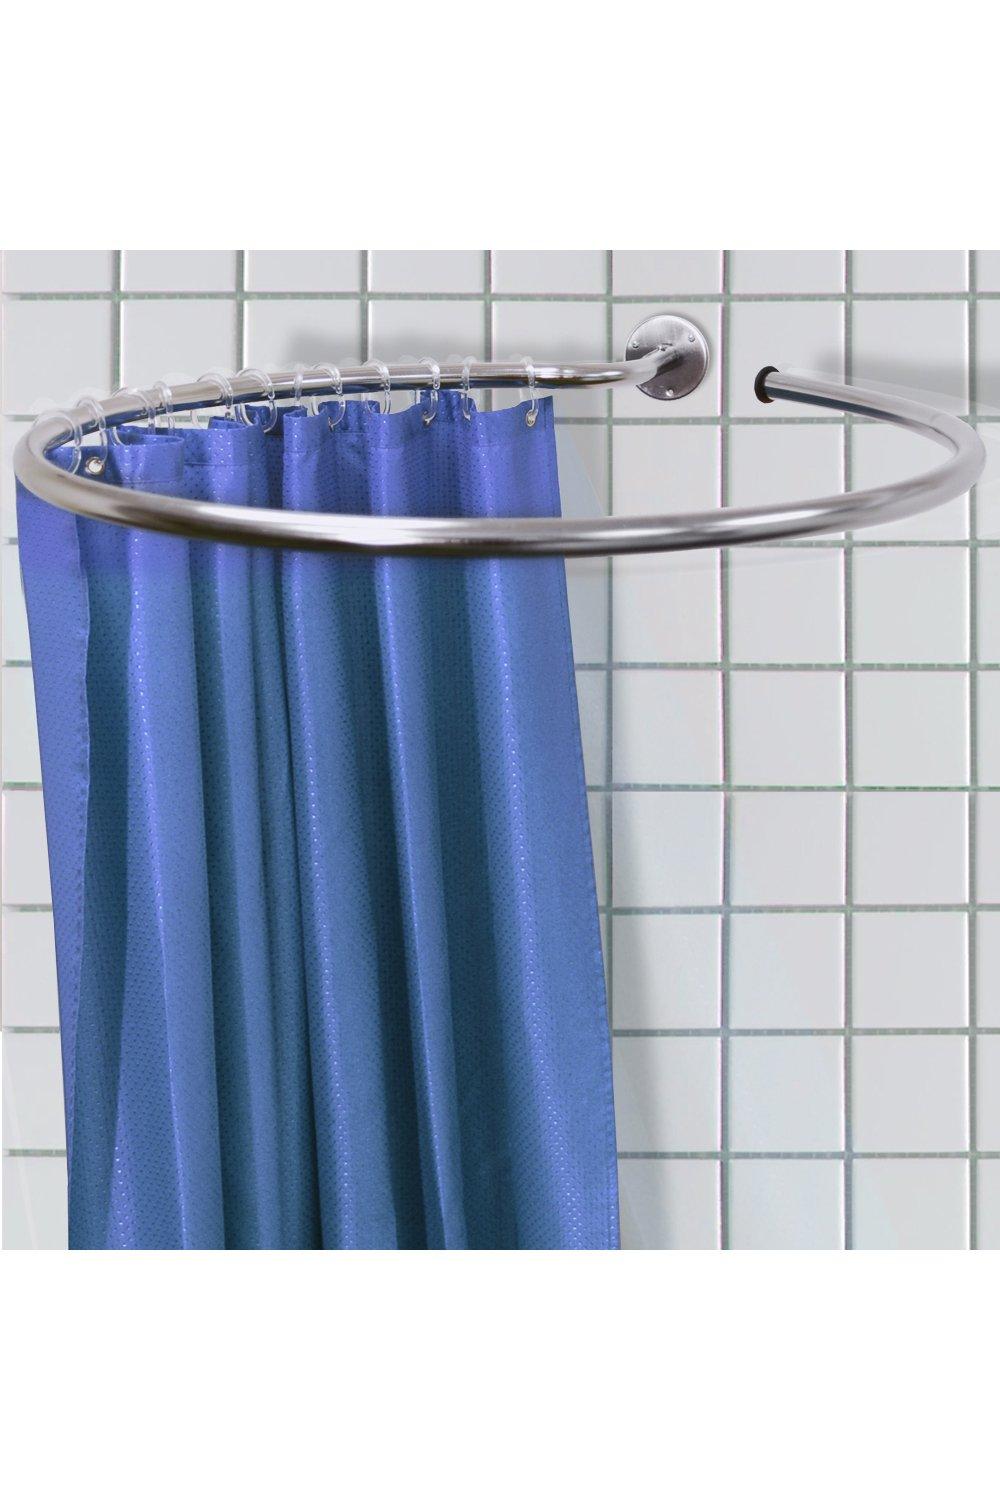 'Loop'  Stainless Steel Circular Shower Curtain Rail And Curtain Rings